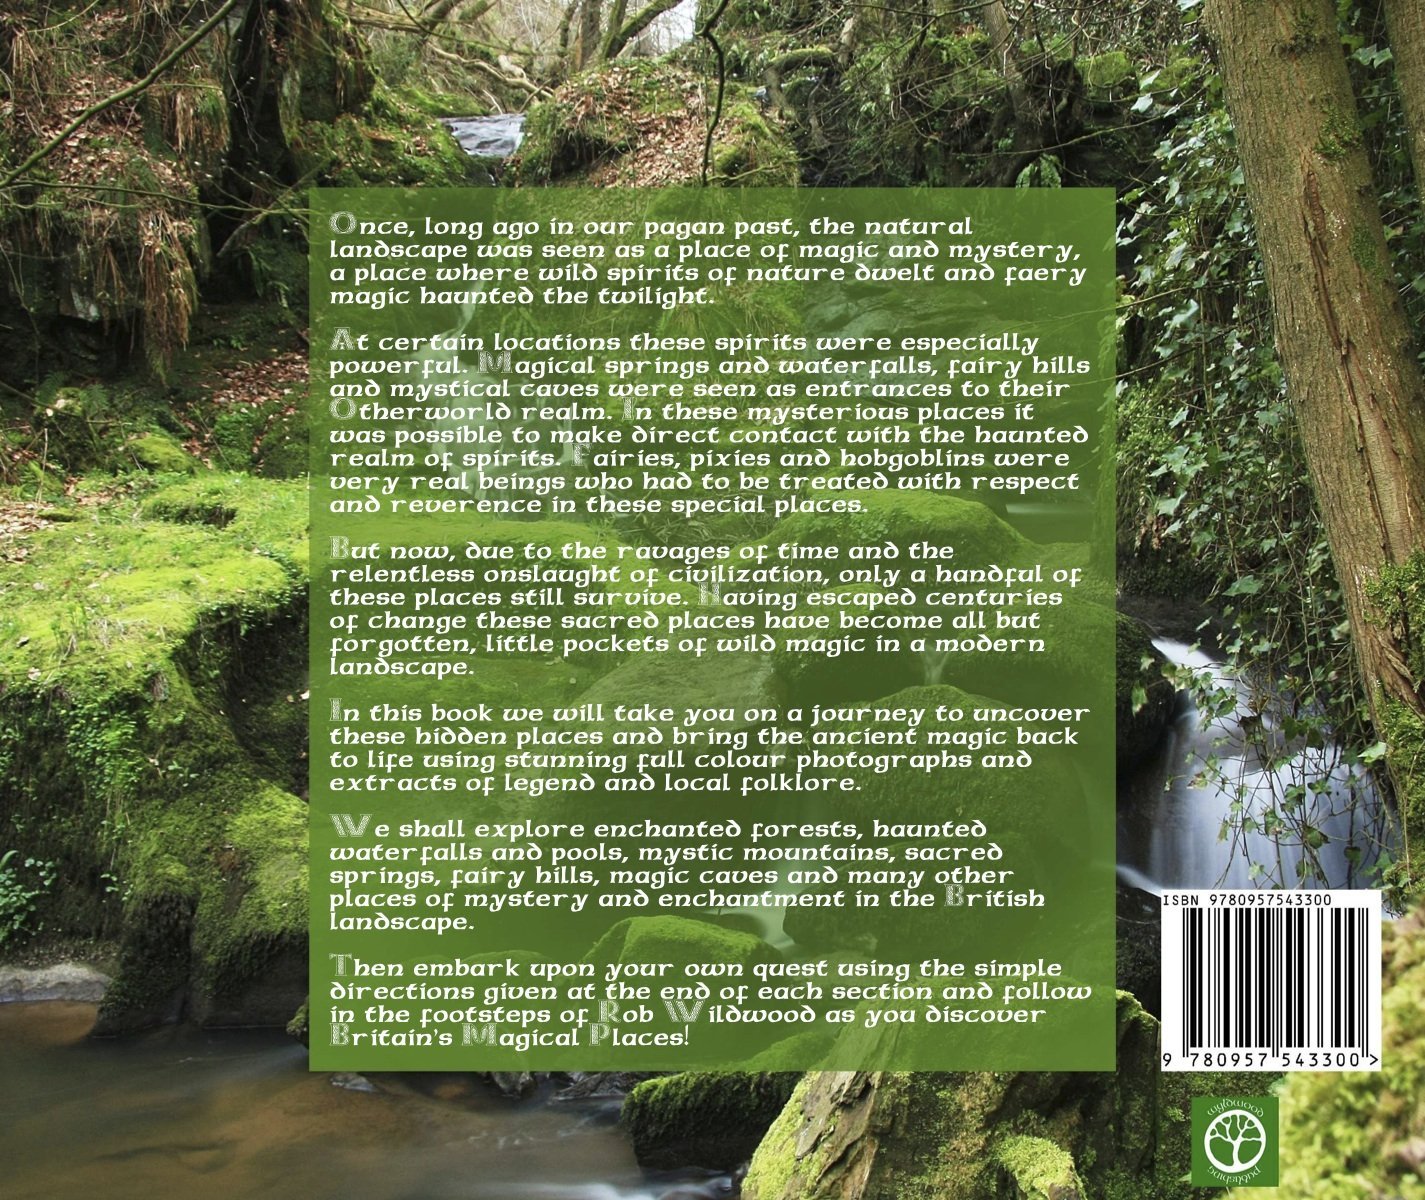 Magical Places Of Britain Book - Back Cover - Viking Dragon Books